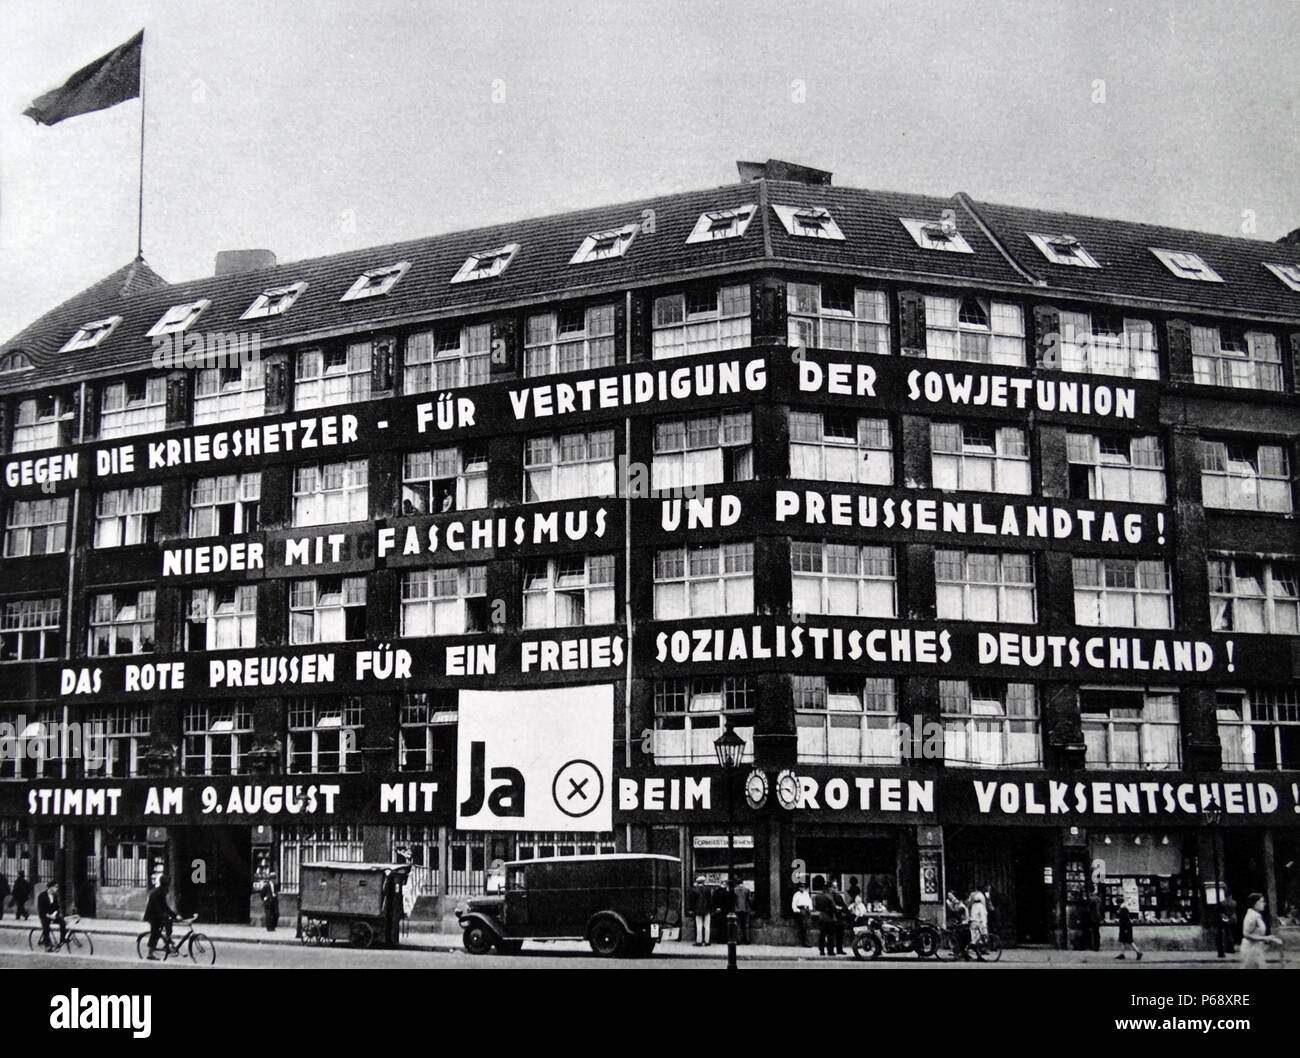 Communist slogans on a building in Germany challenge voters to be aware of Nazi menace 1932 Stock Photo